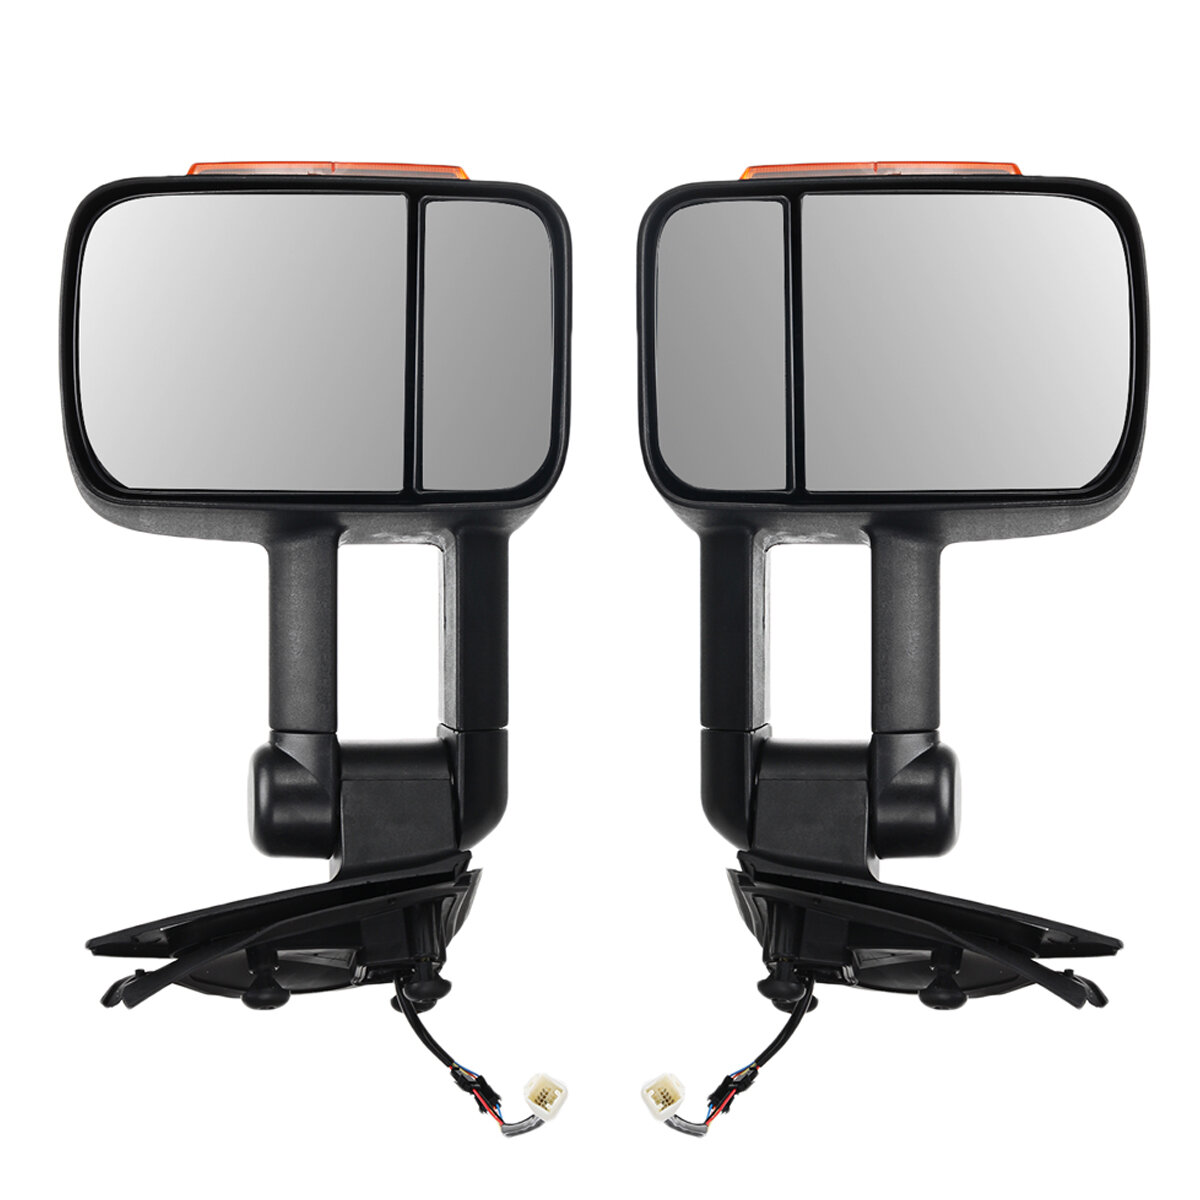 2X Extendable Towing Mirrors For Isuzu D-MAX MY 2012-2019 Ute/Cab Chassis Models